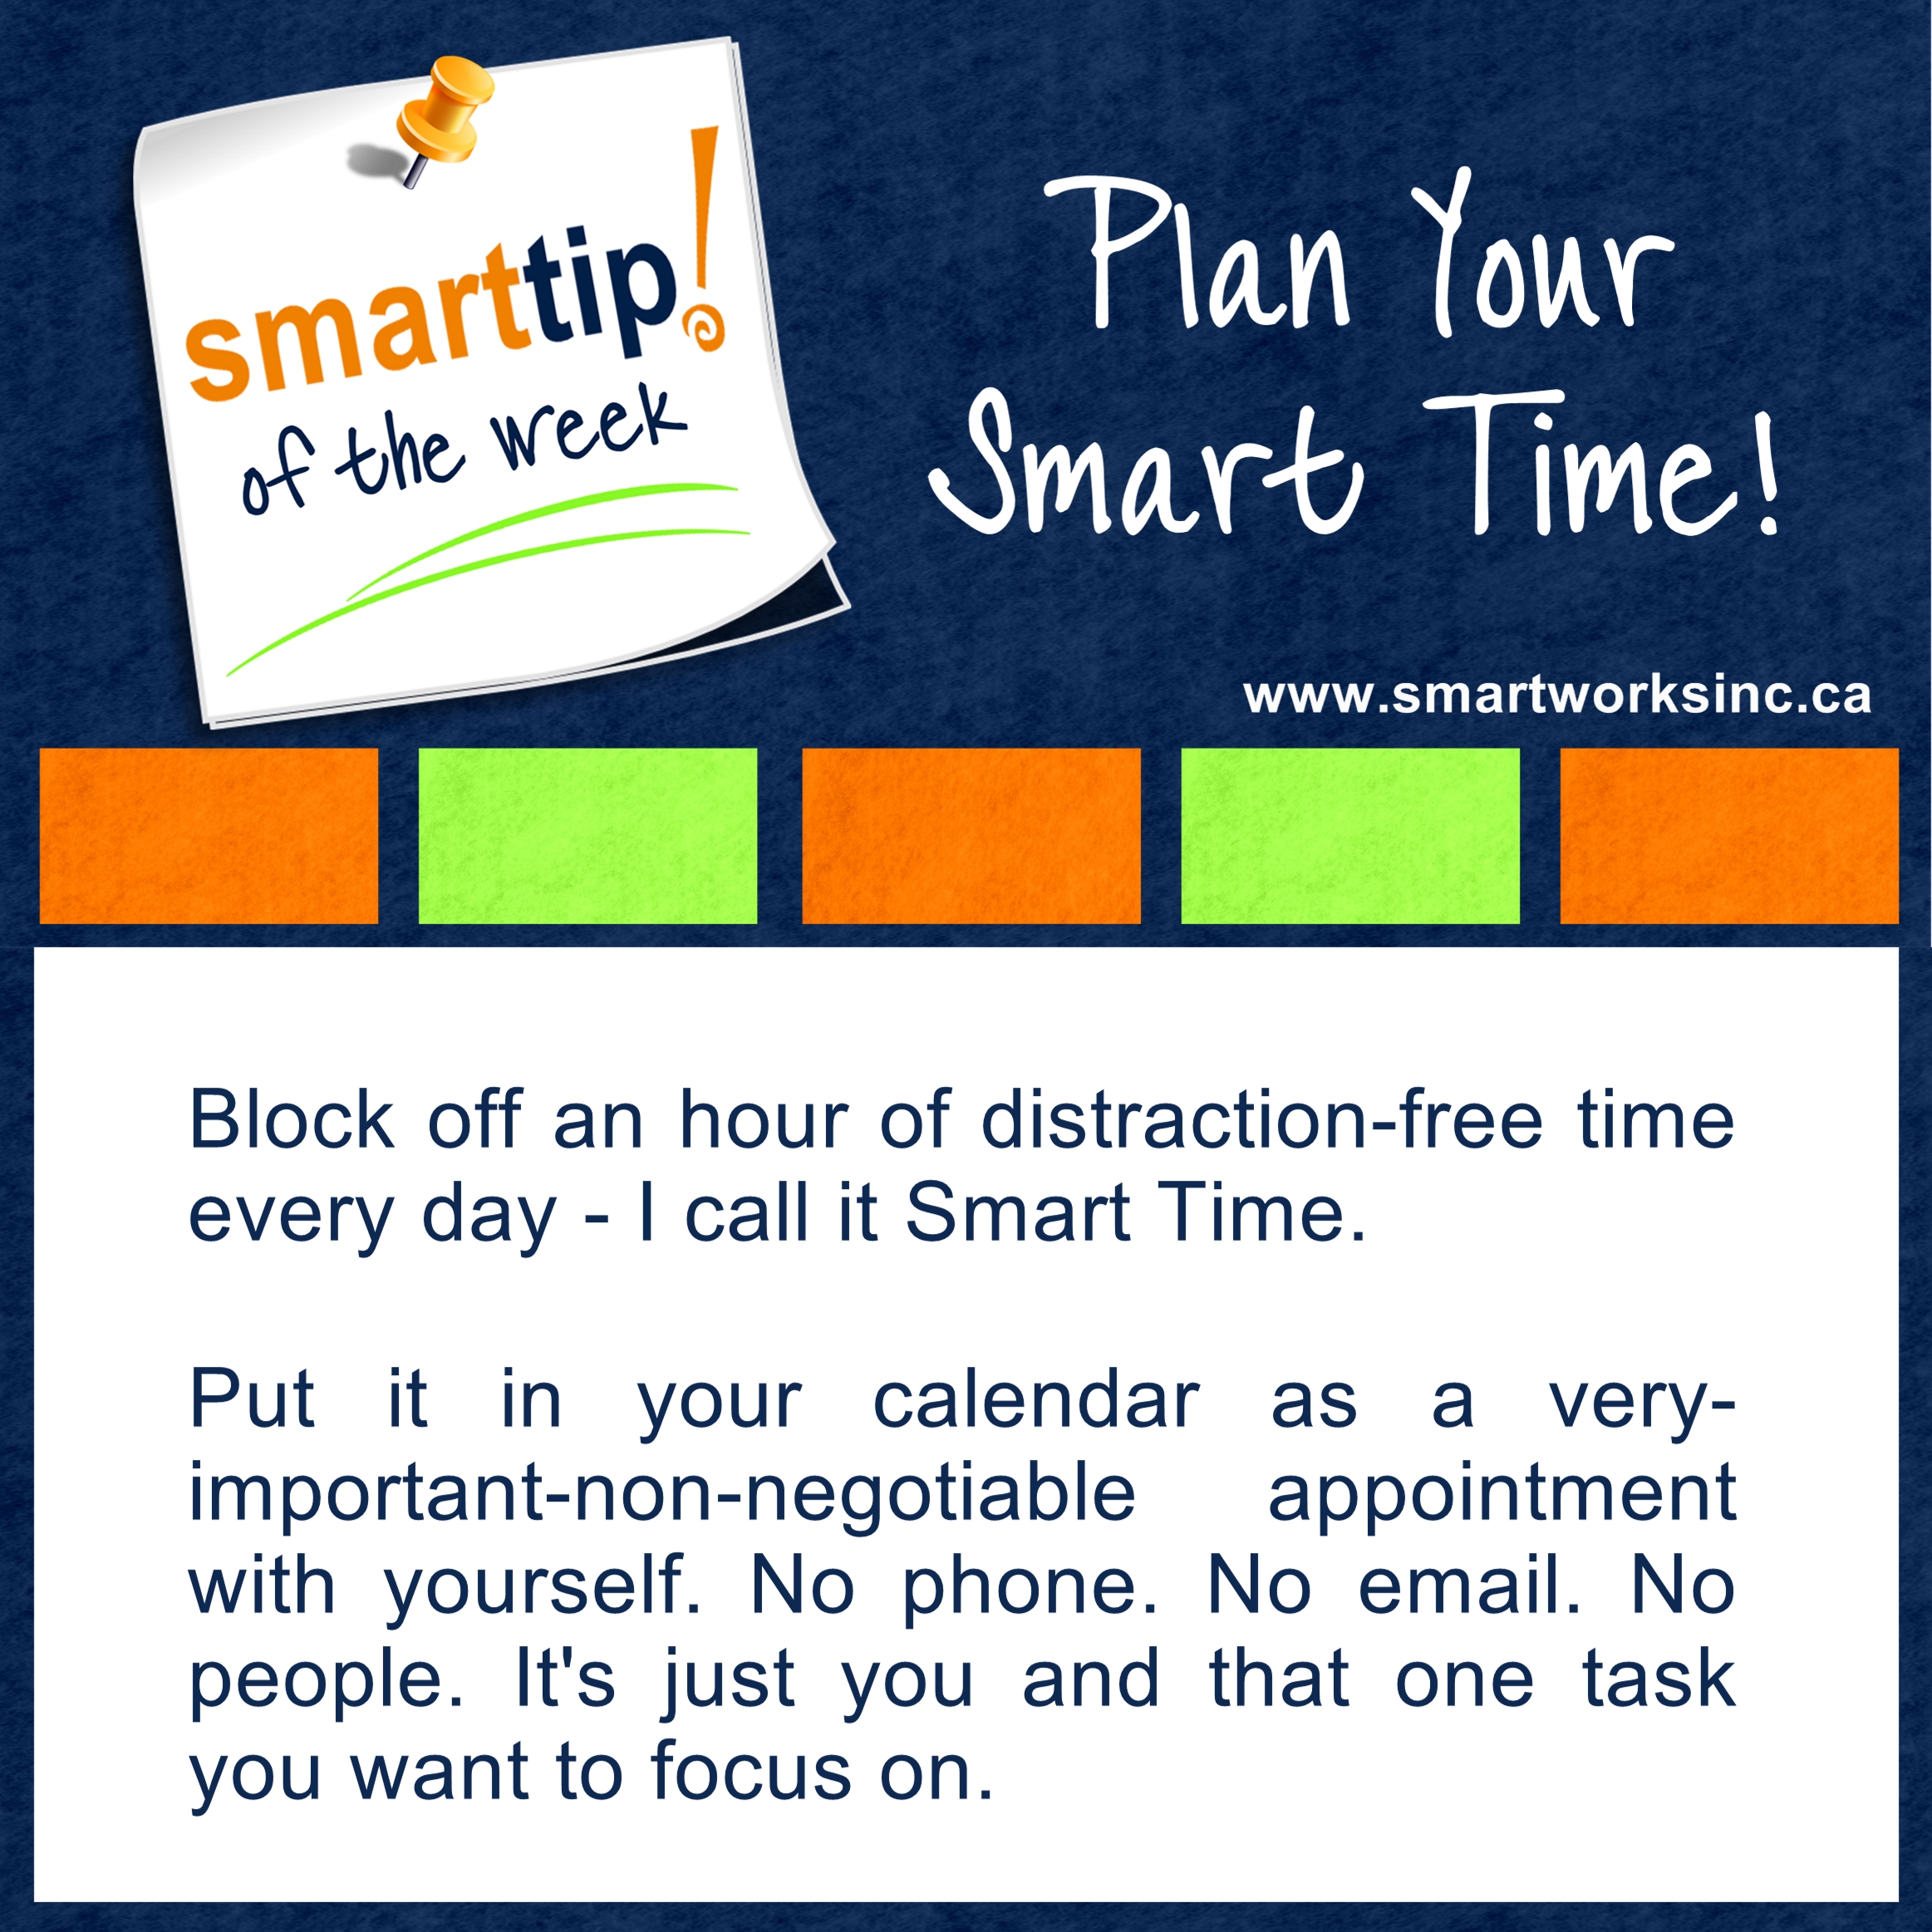 17-plan-your-smart-time